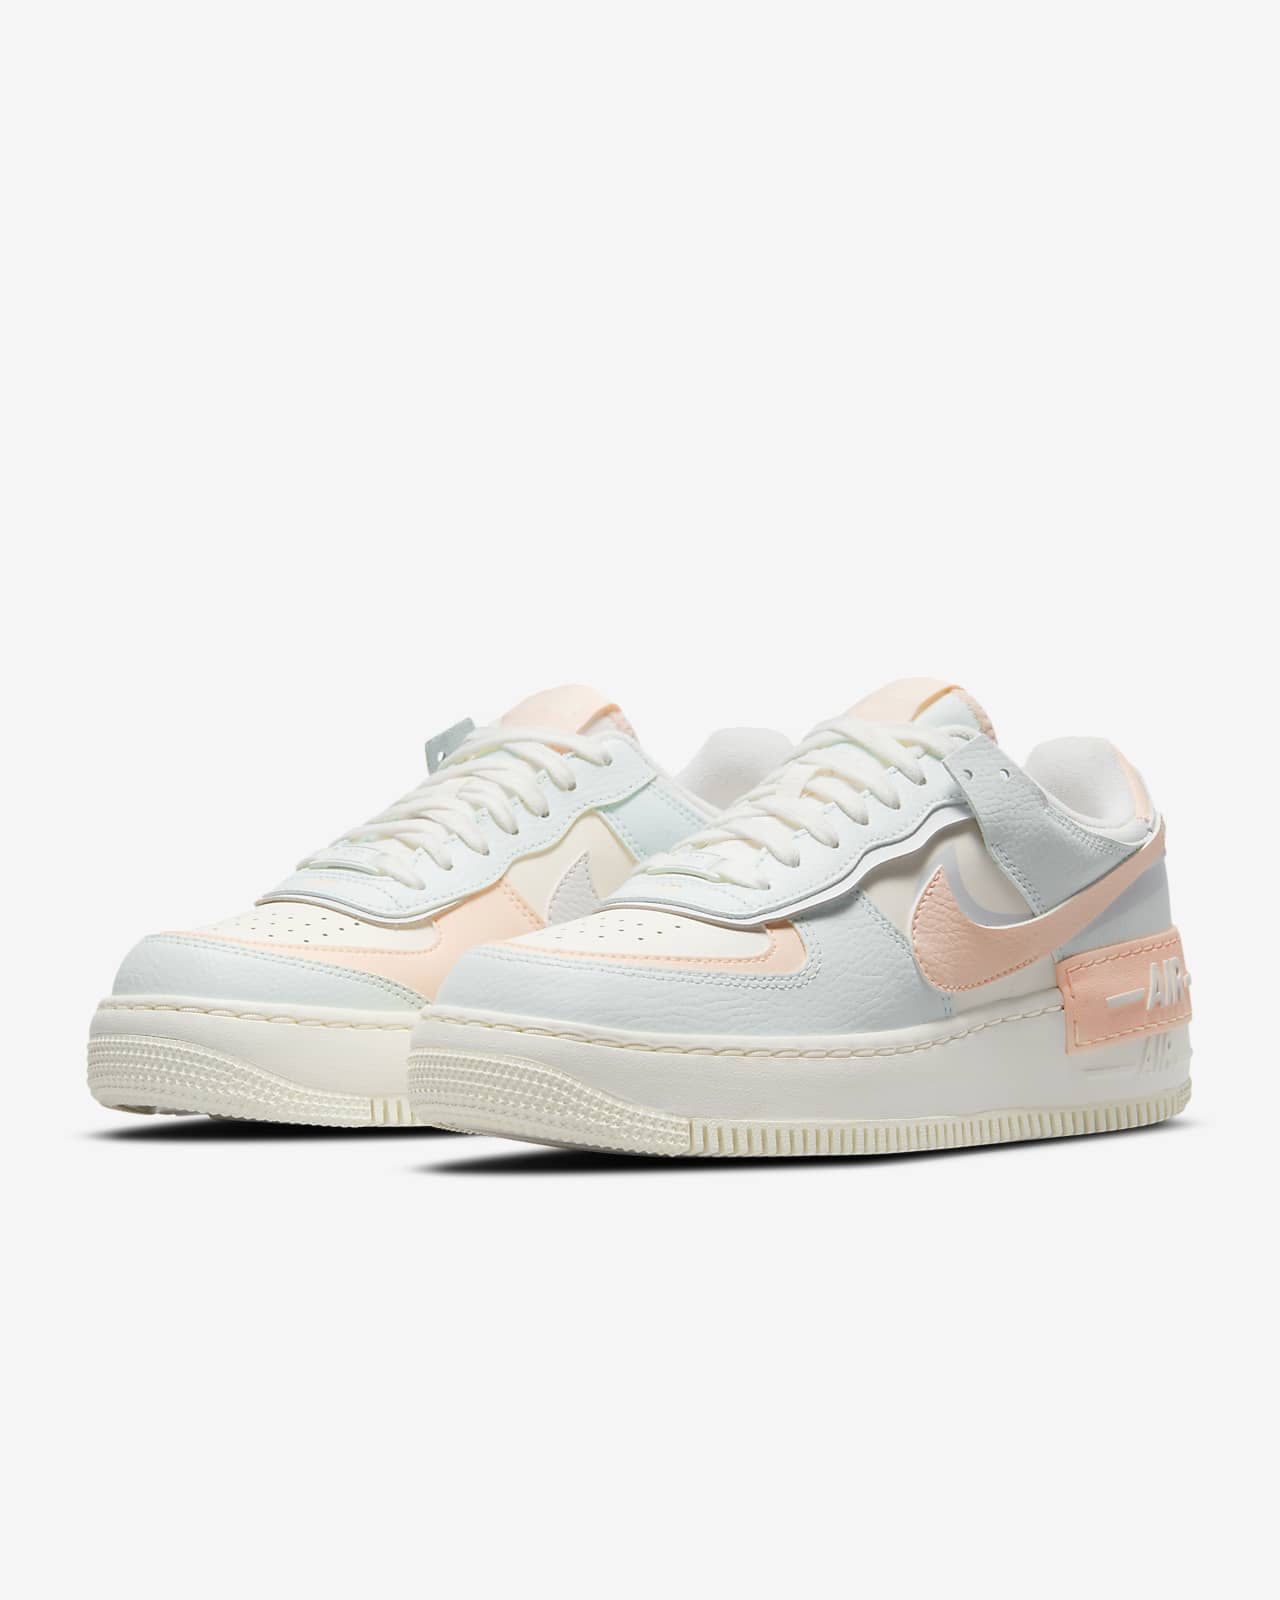 nike air force one shadow women's